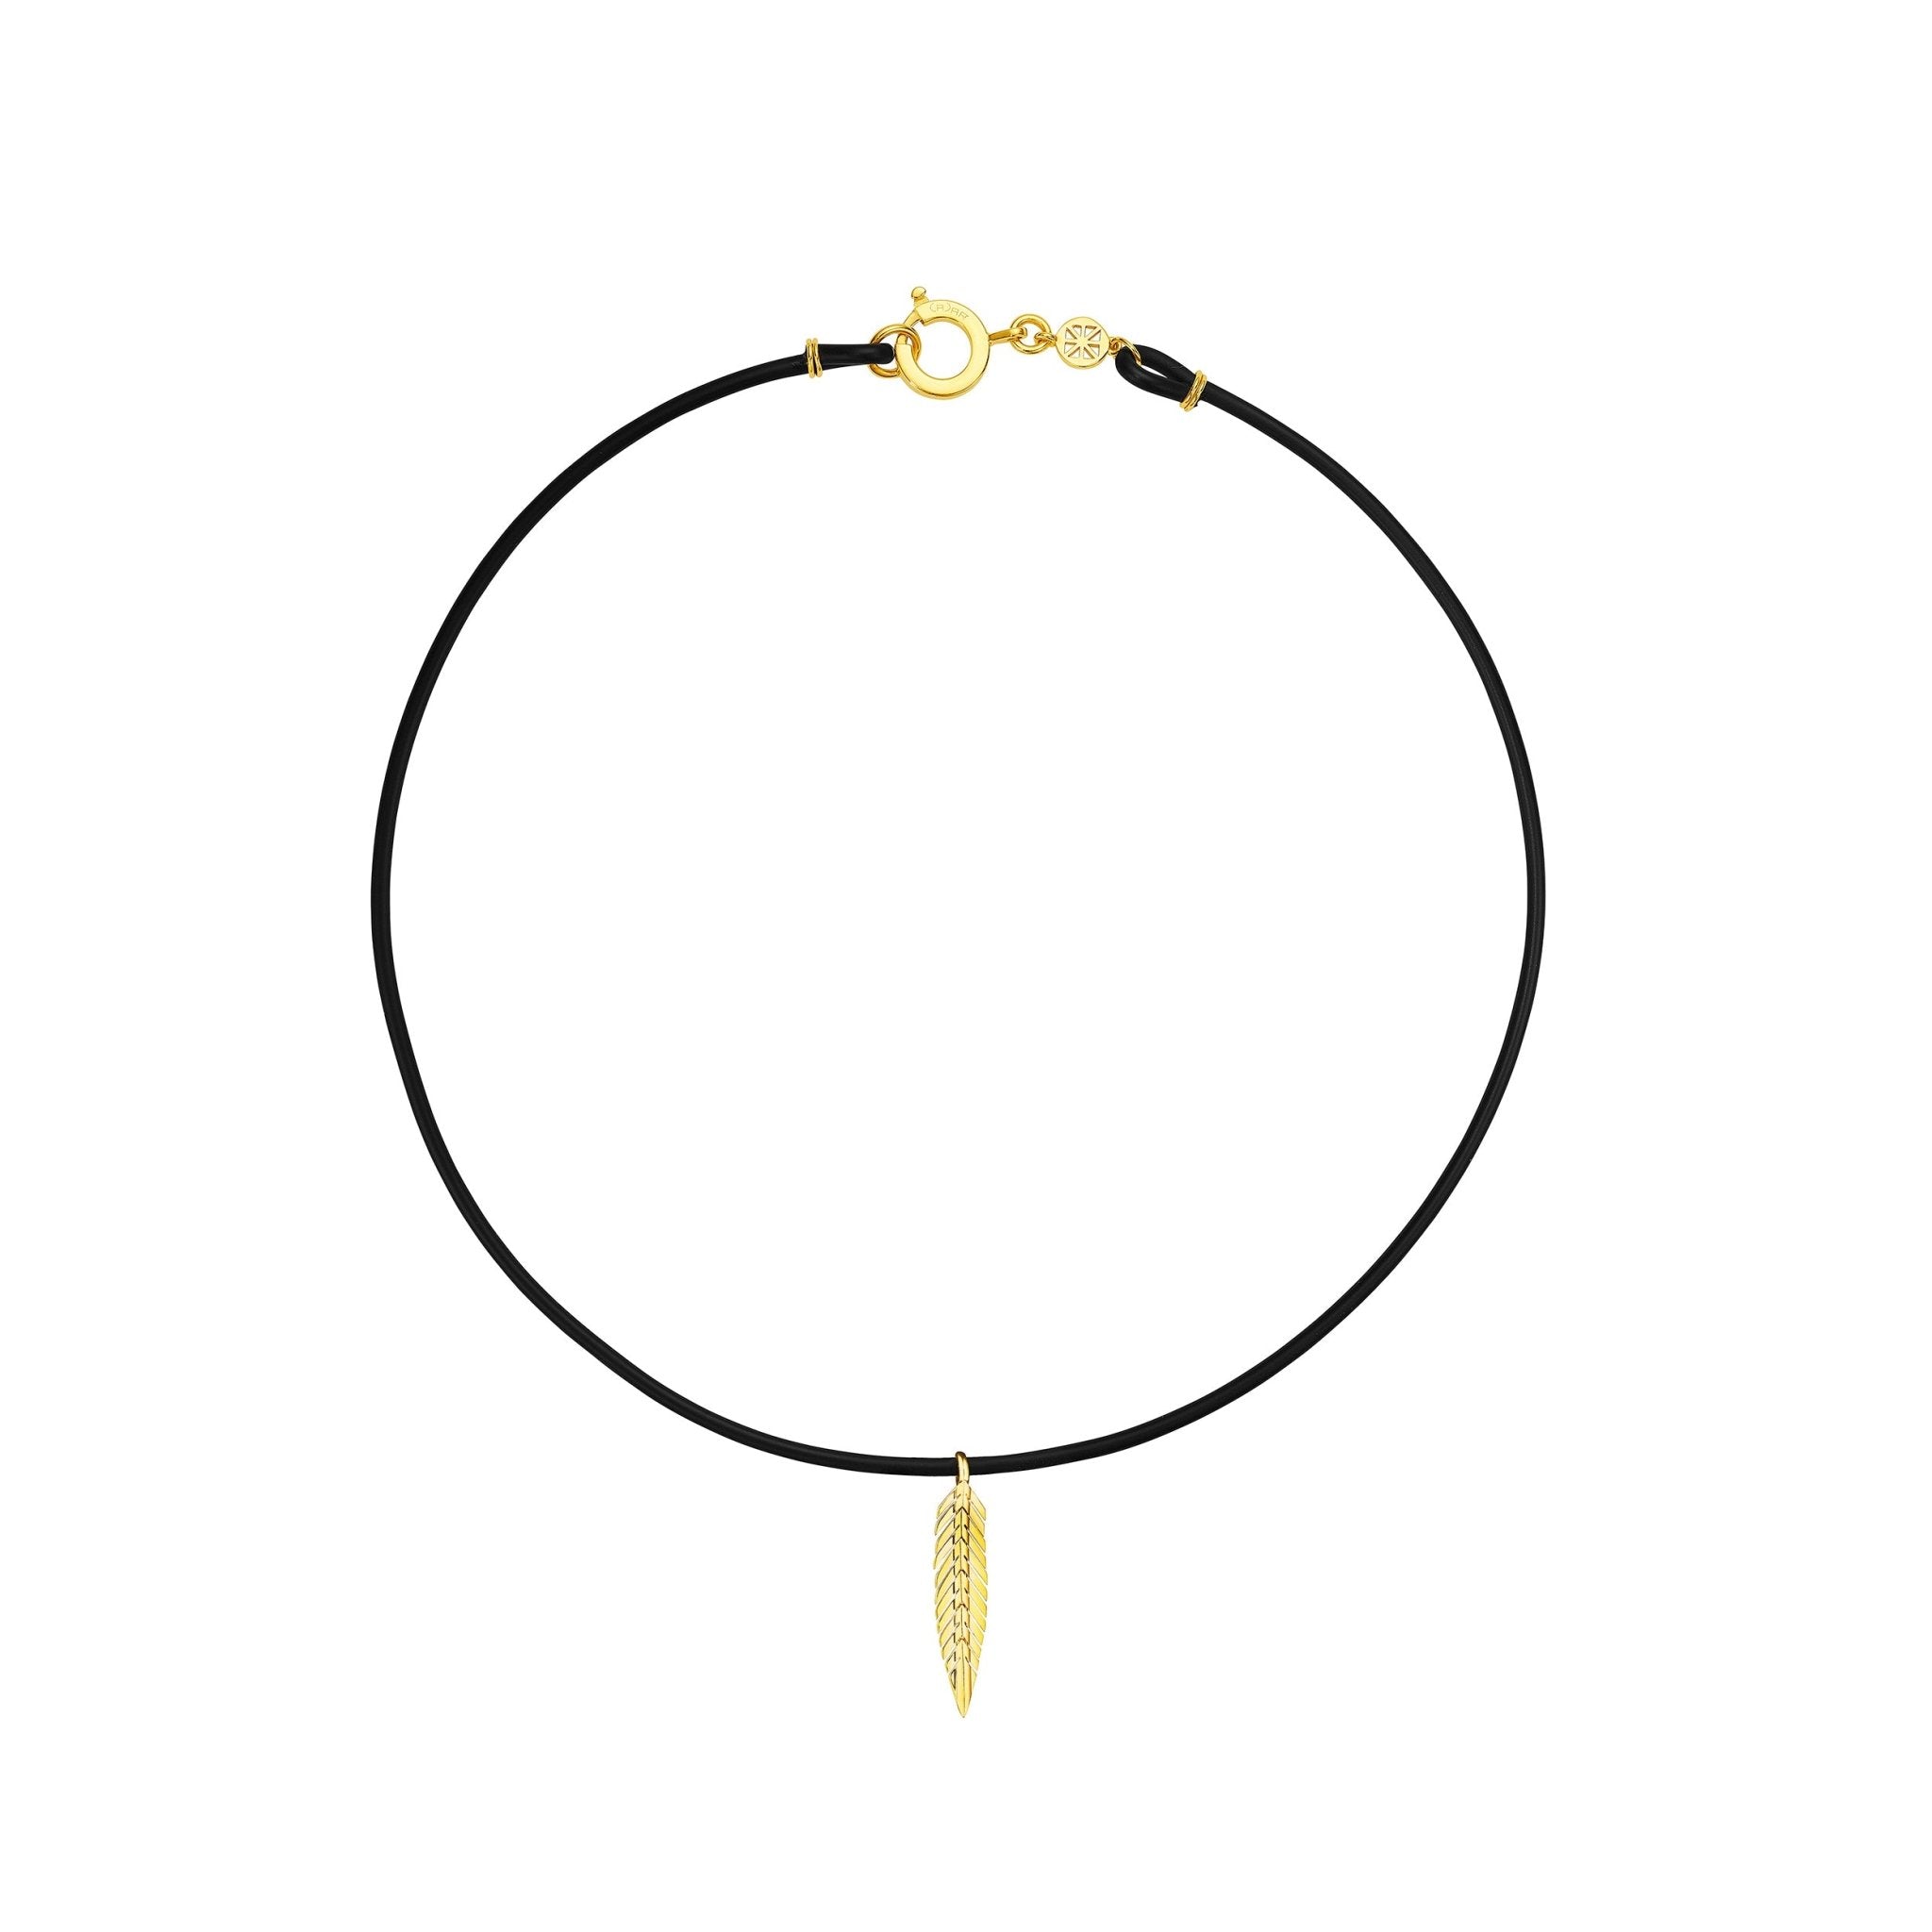 3 Feather Pendant Necklace Connector Gold by TIJC SP1387 